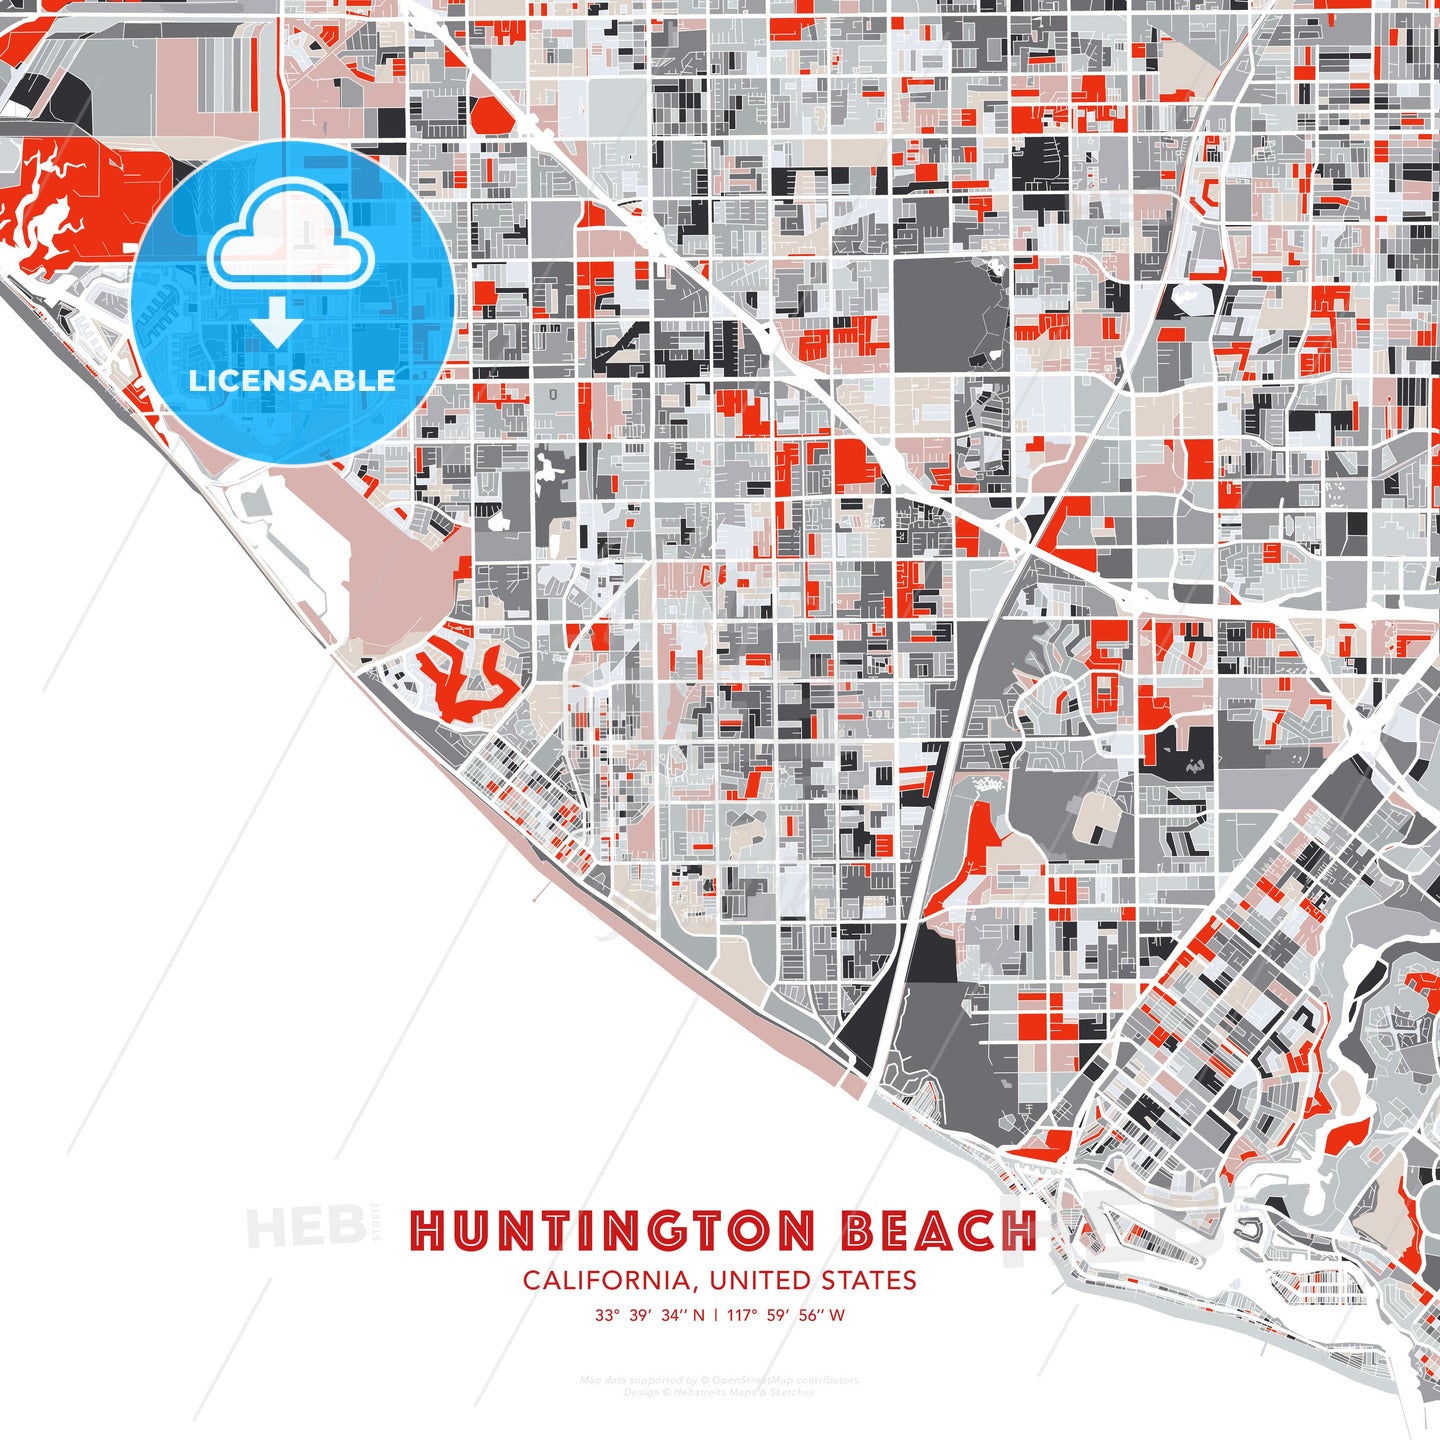 Huntington Beach, California, United States, modern map - HEBSTREITS Sketches